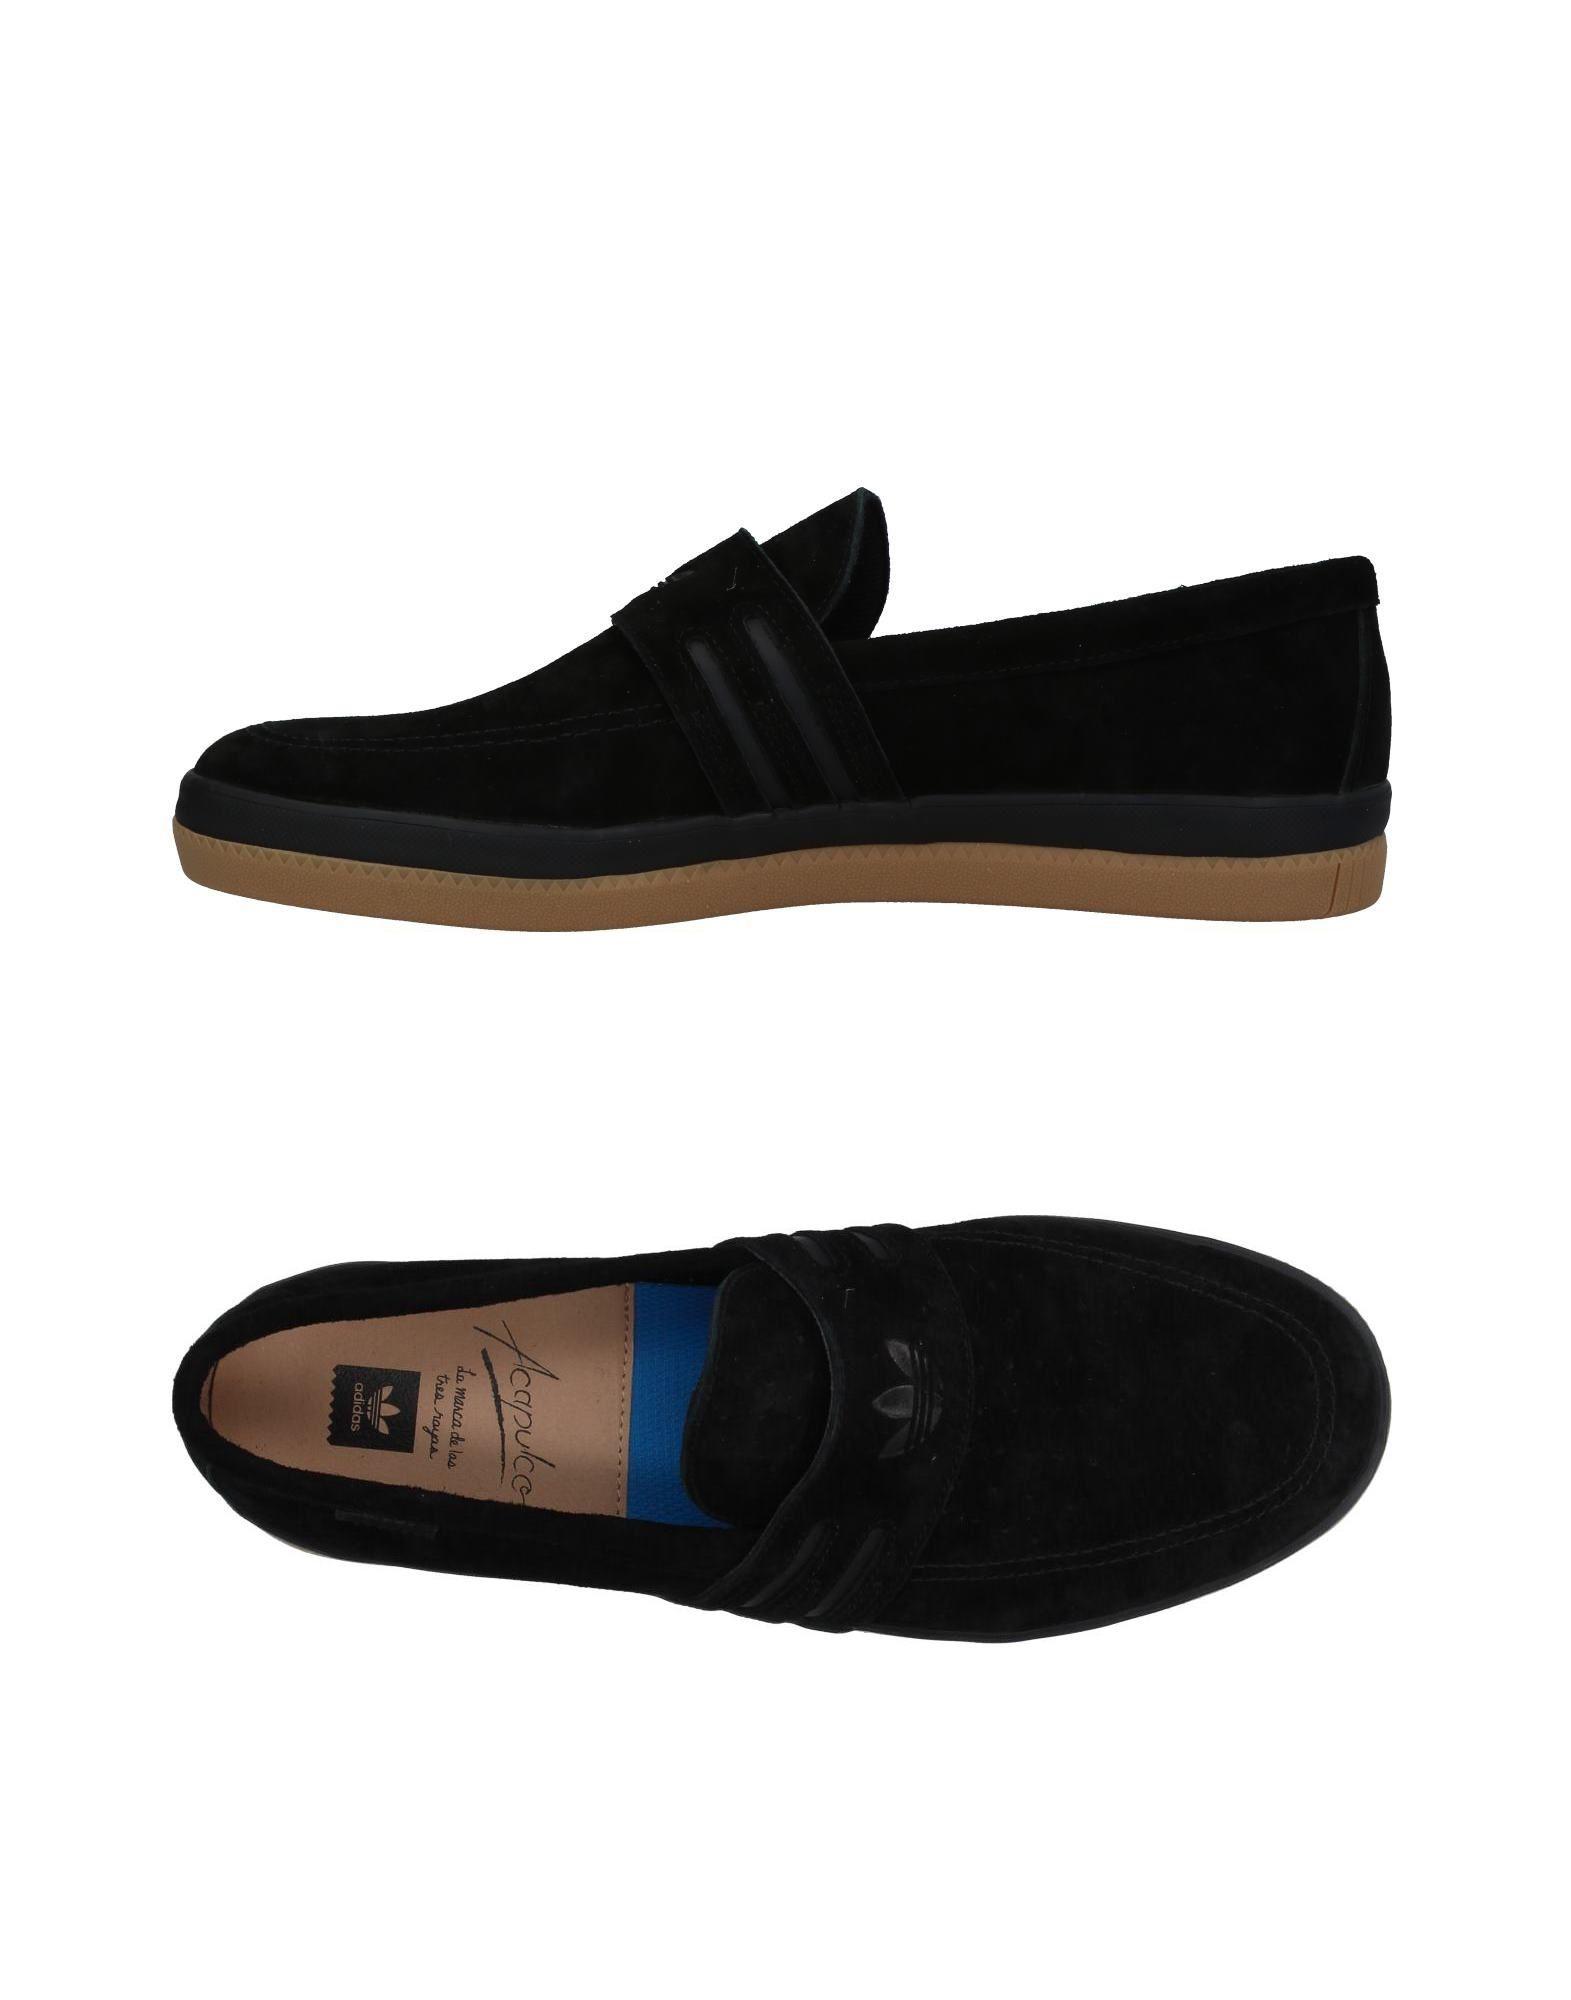 loafer shoes adidas